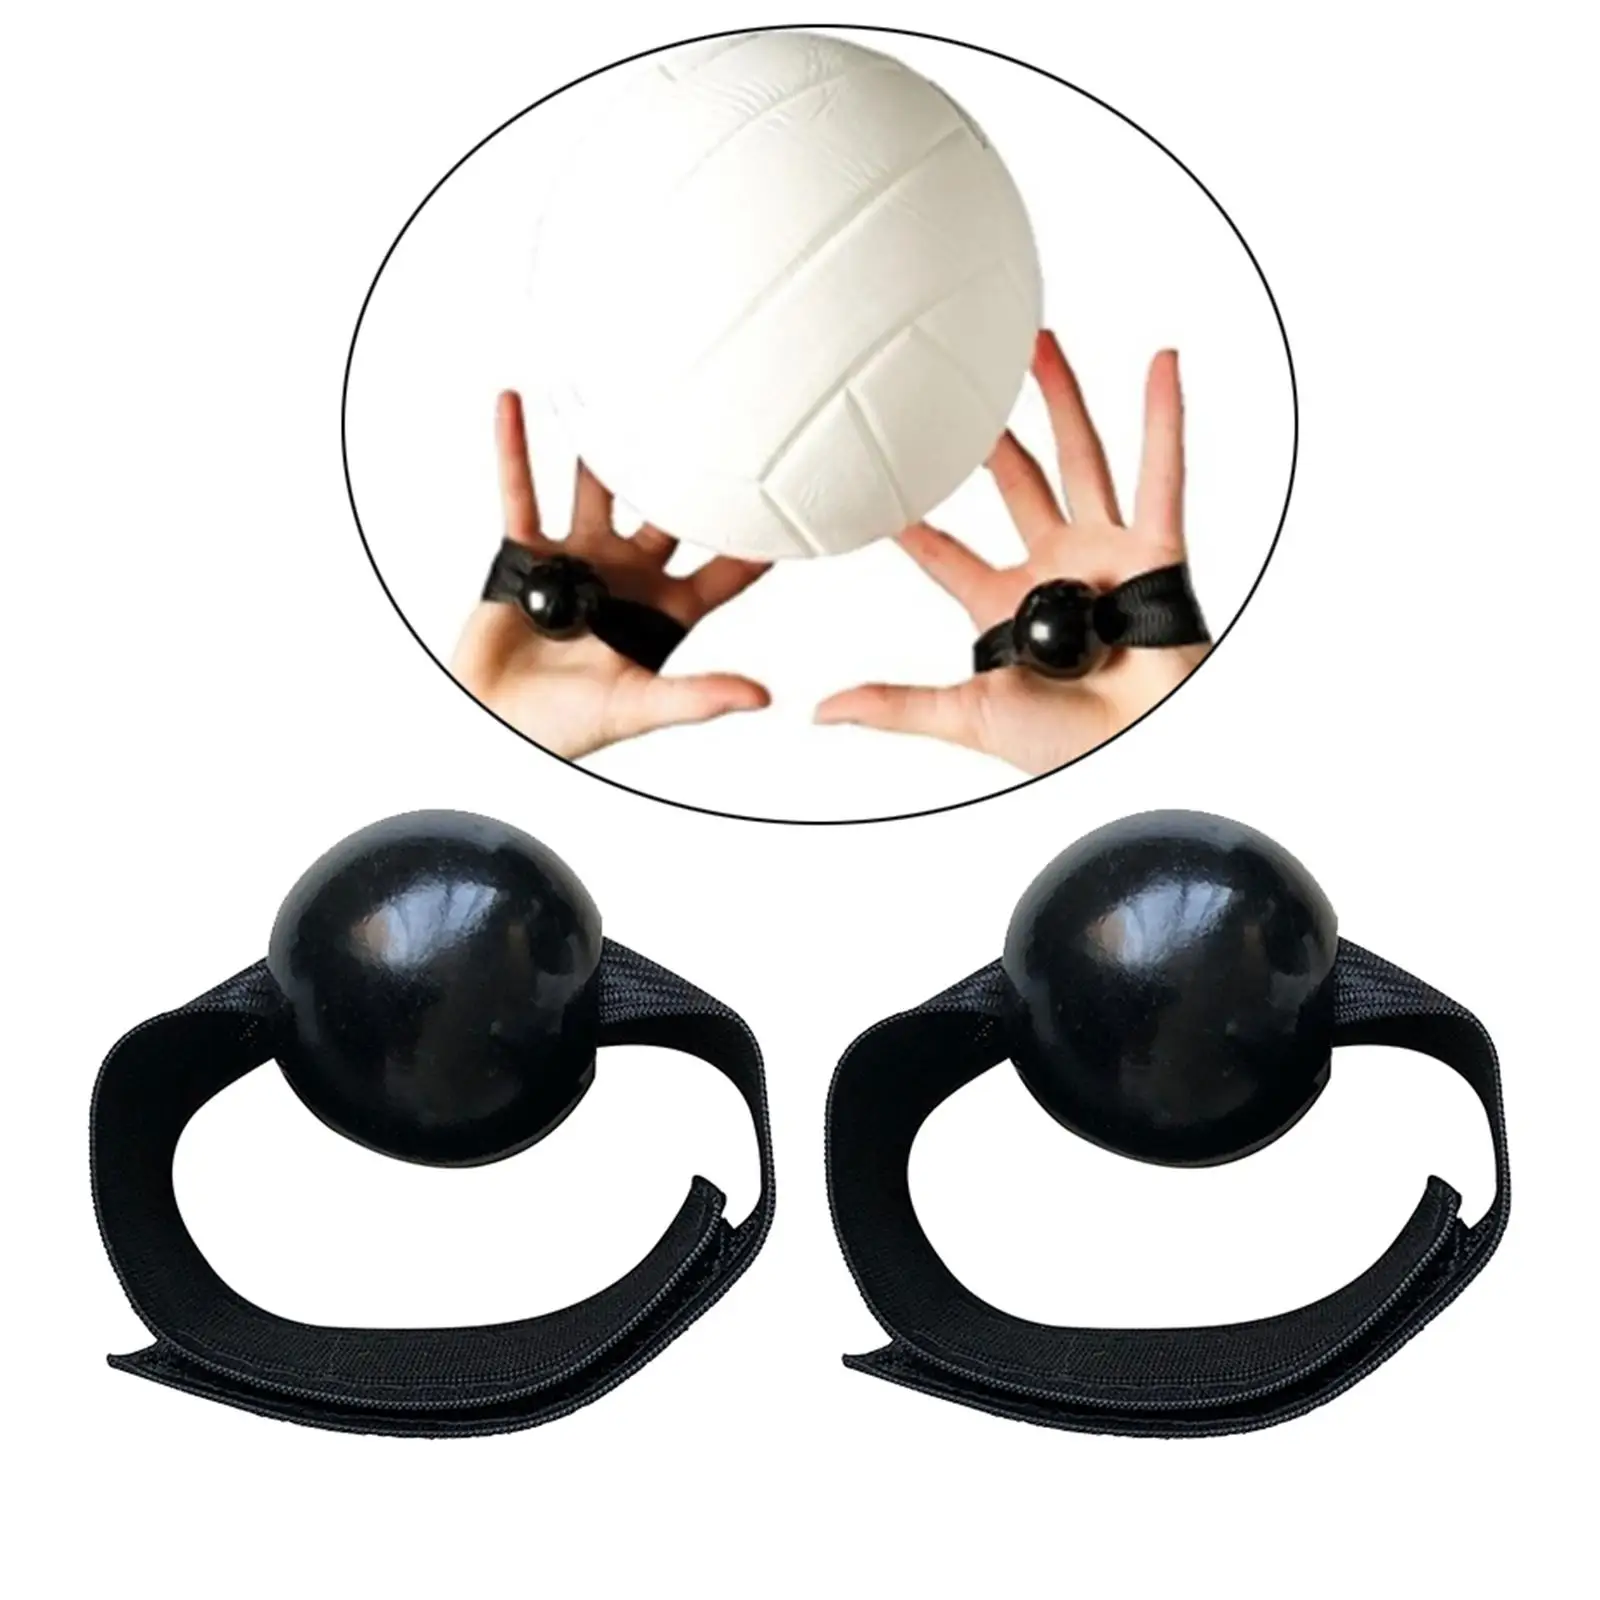 Volleyball Setting Drills Training Aid- Adjustable Palm Hand Practice Strap